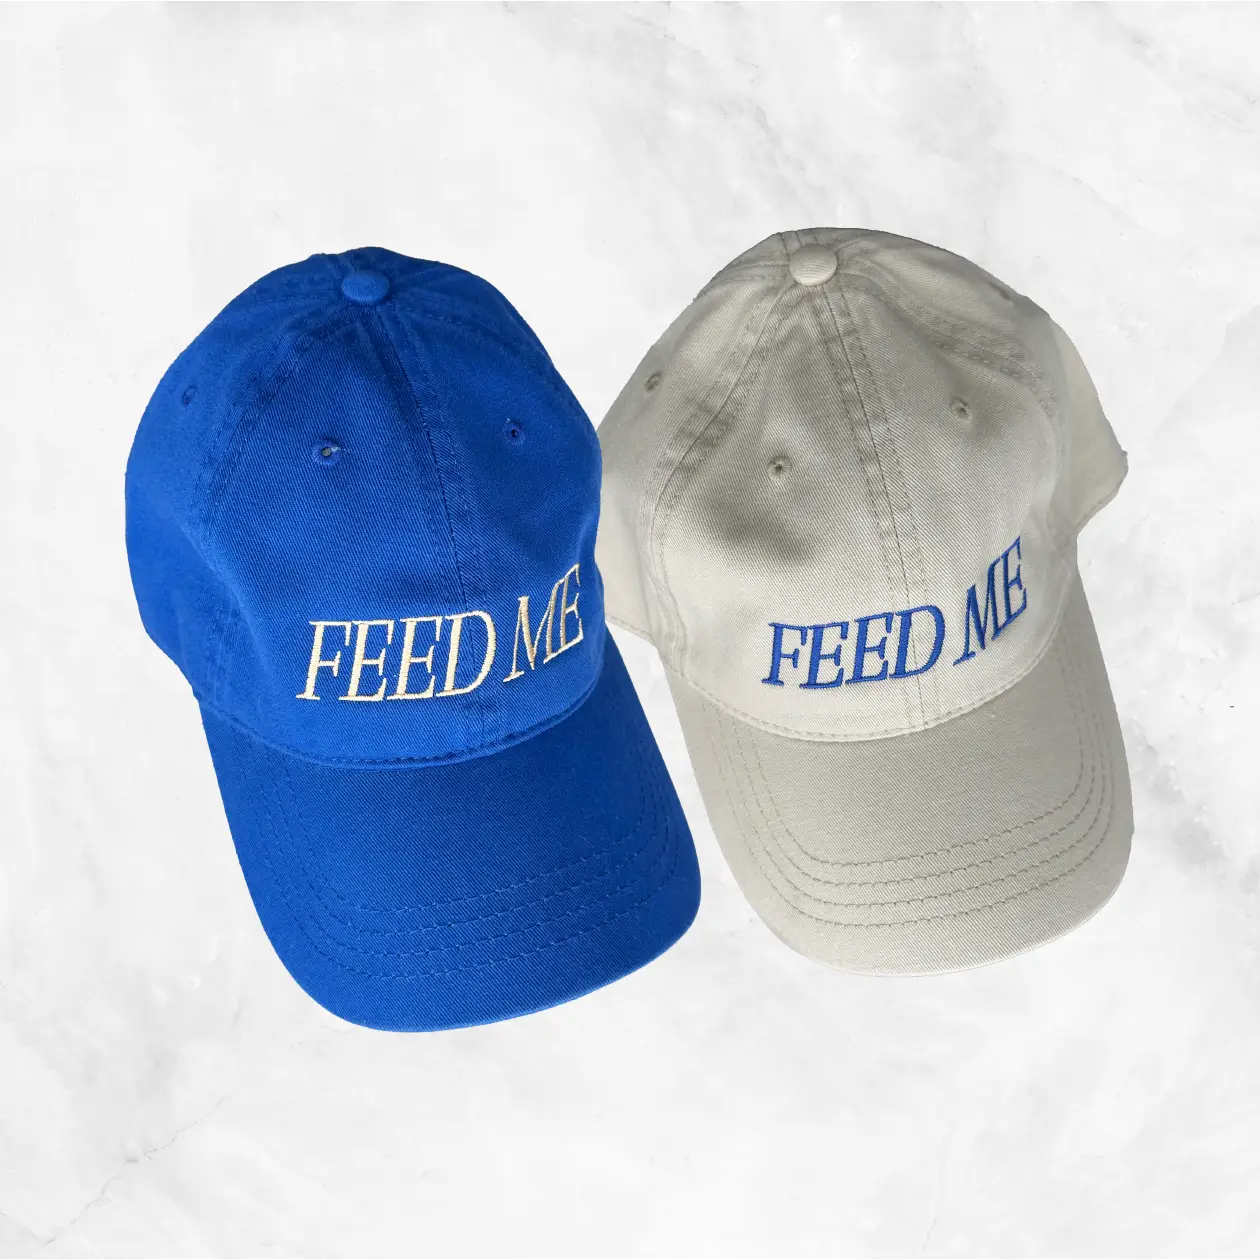 Feed Blue & Gray Caps Delivery